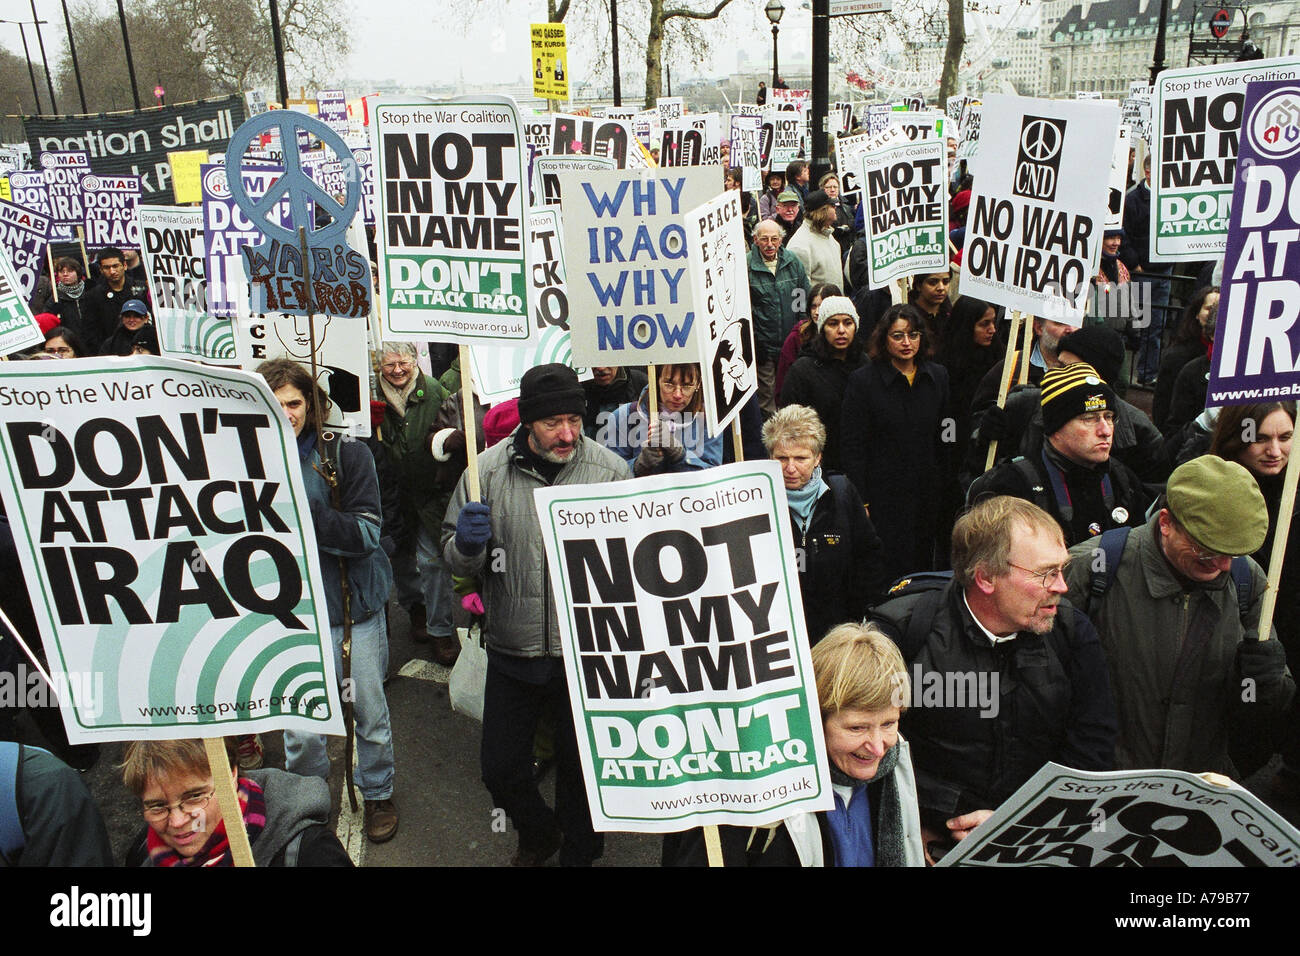 Demonstration organised by Stop the War coalition in London protesting the war in Iraq, 15th February 2003. Stock Photo